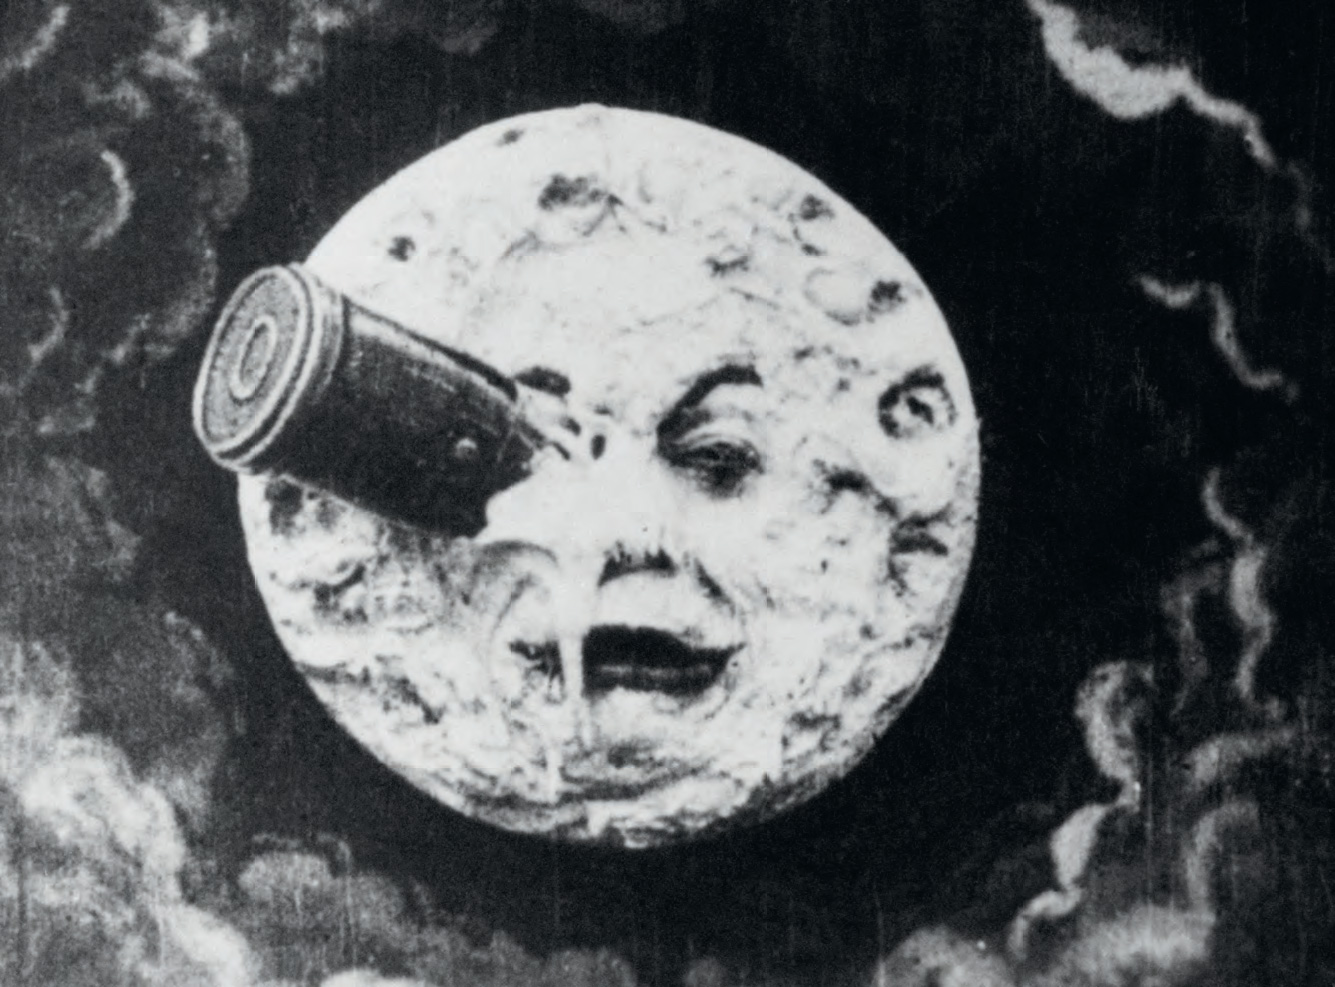 Film still from A Trip to the Moon (Le Voyage dans le lune) (1902) by Georges Méliès, as reproduced in Universe